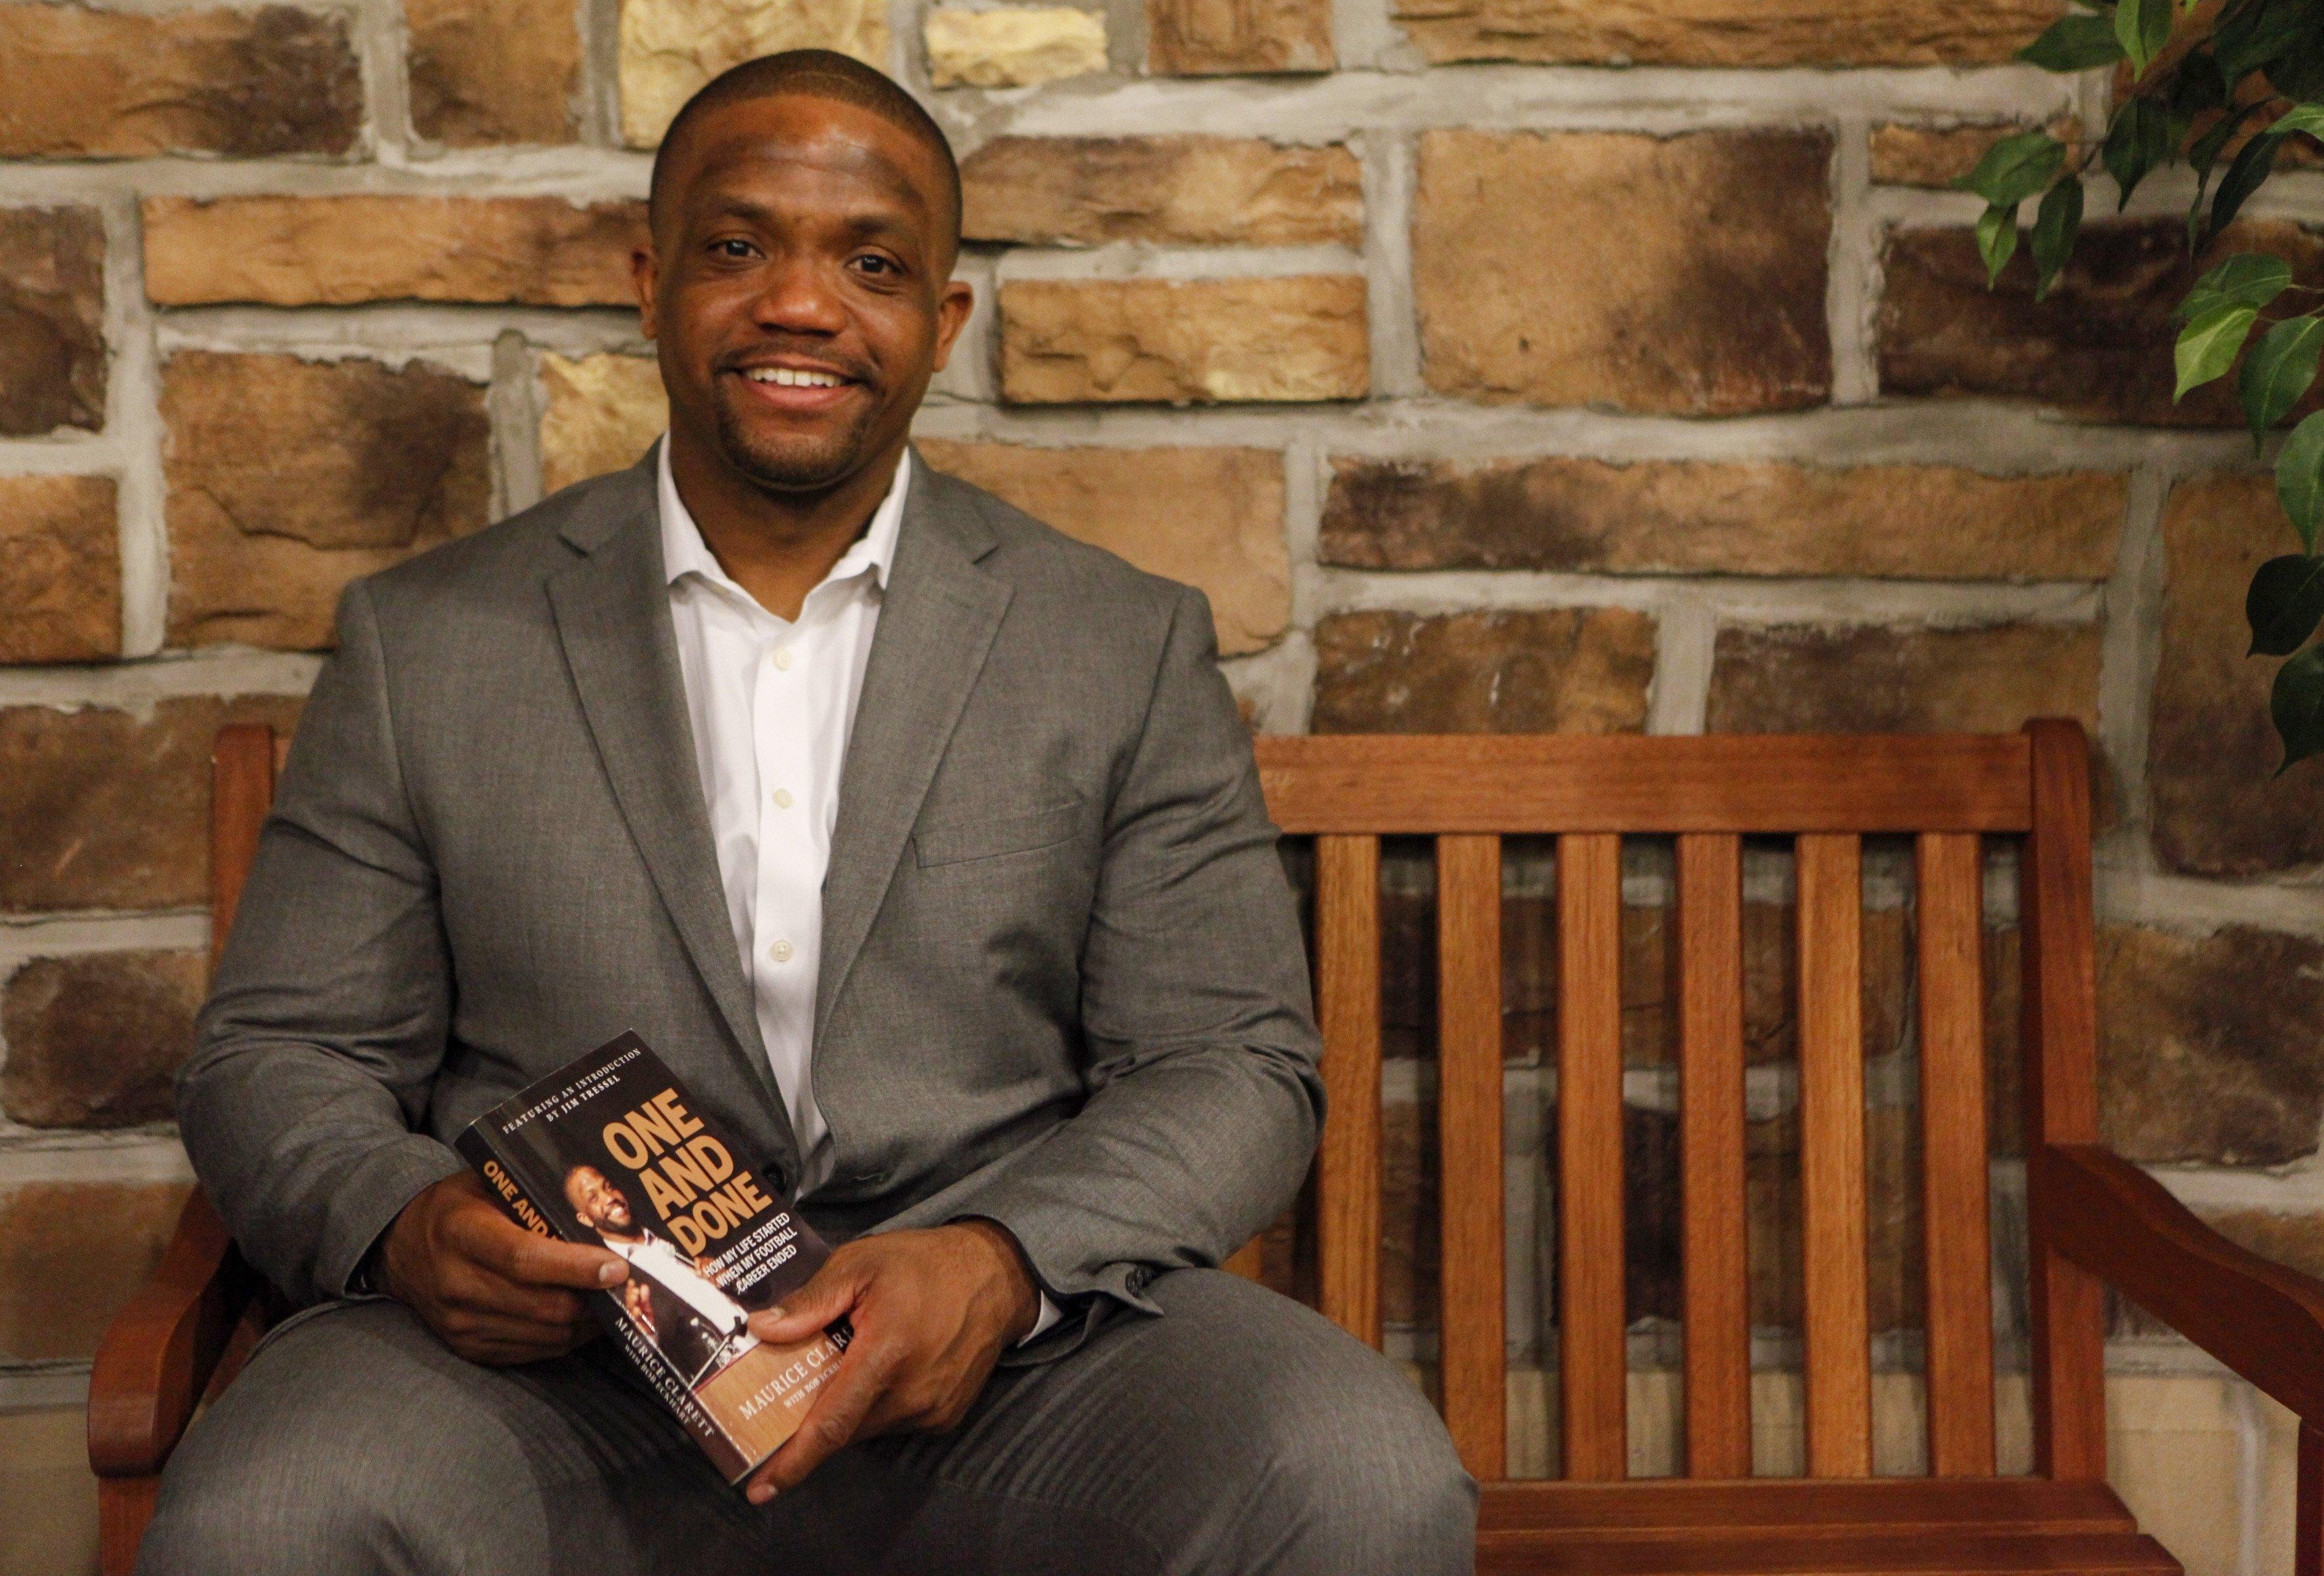 Maurice Clarett Expands Mission as Motivational Speaker with Autobiography